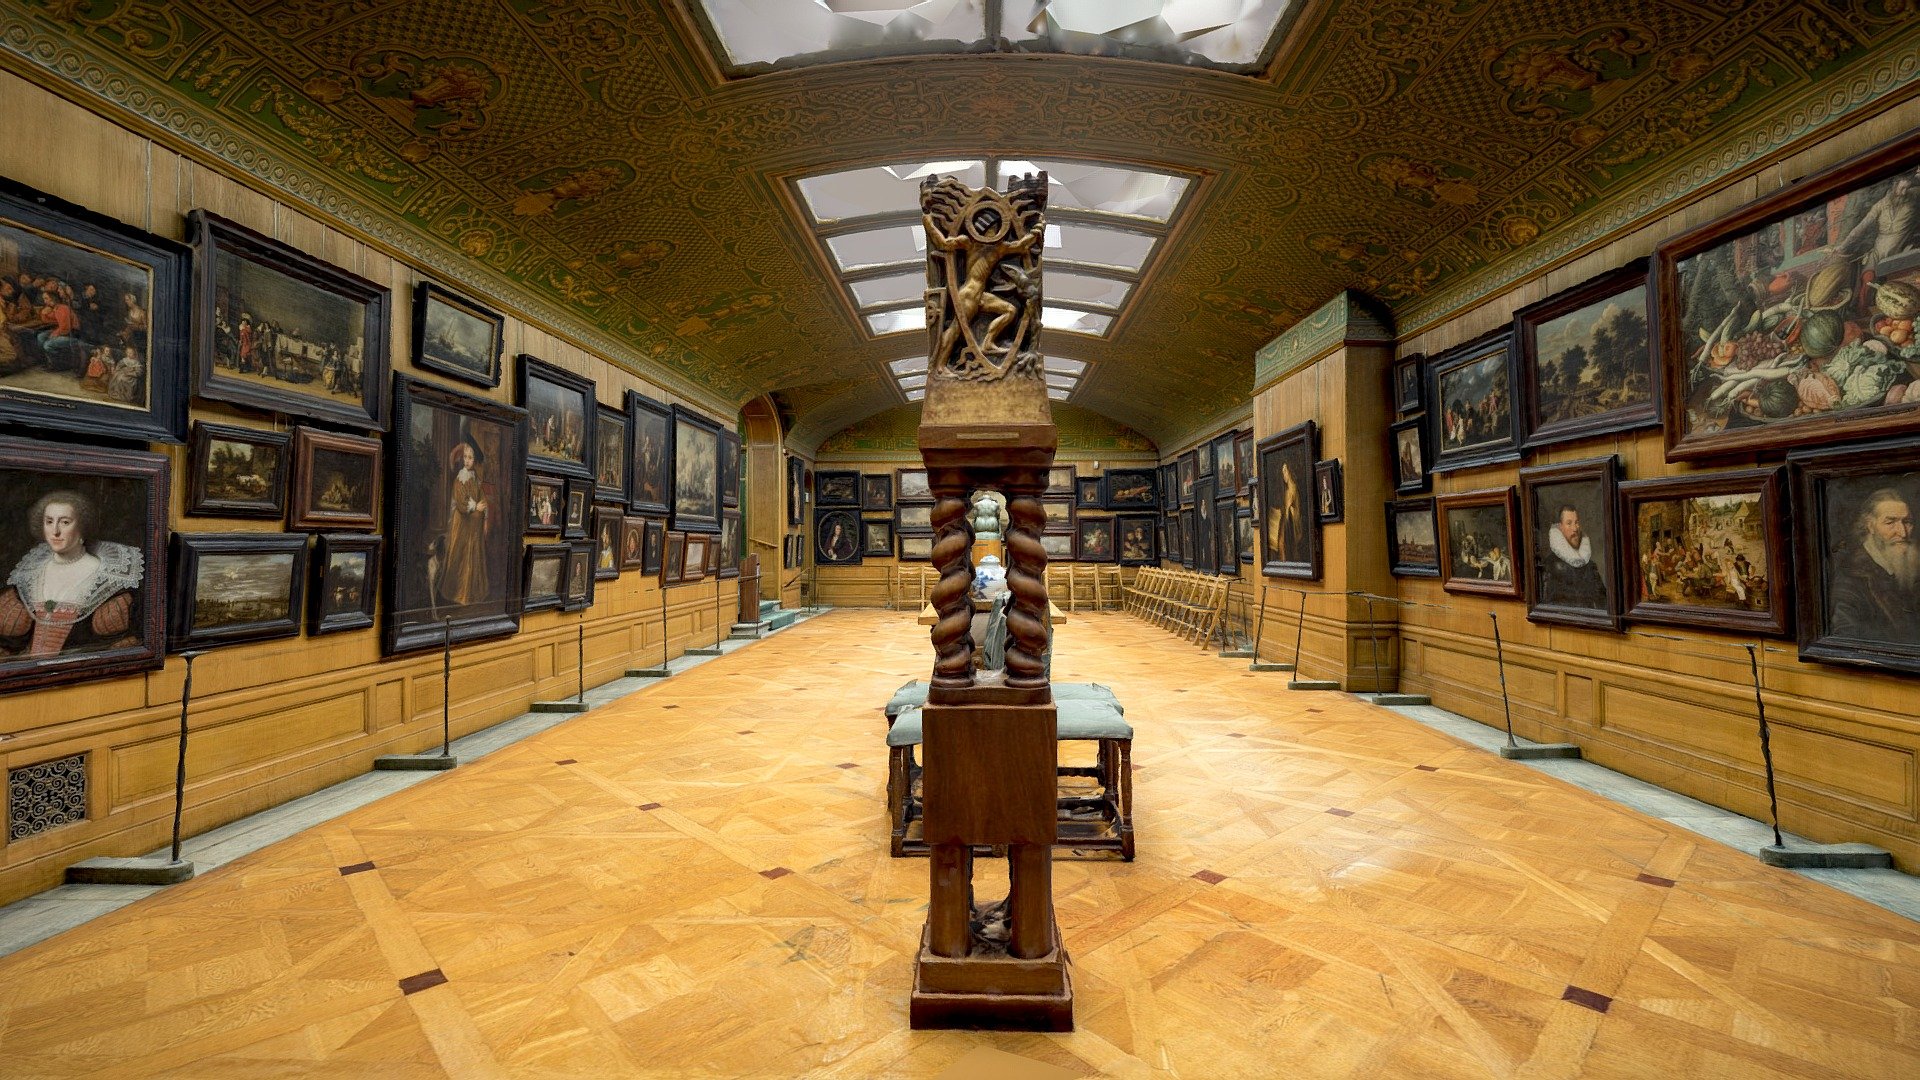 This is the Picture Gallery located on the top floor of the Hallwyl Museum in Stockholm, Sweden.

Countess Wilhelmina von Hallwyl was a keen collector of Dutch and Flemish artworks of the Golden Age.

The diversity of artists and motifs is representative of the Hallwyl House Collection of Dutch and Flemish masters. The collection constitutes a kind of encyclopedia of the Golden Age of Dutch Art.

&ldquo;See For Yourself